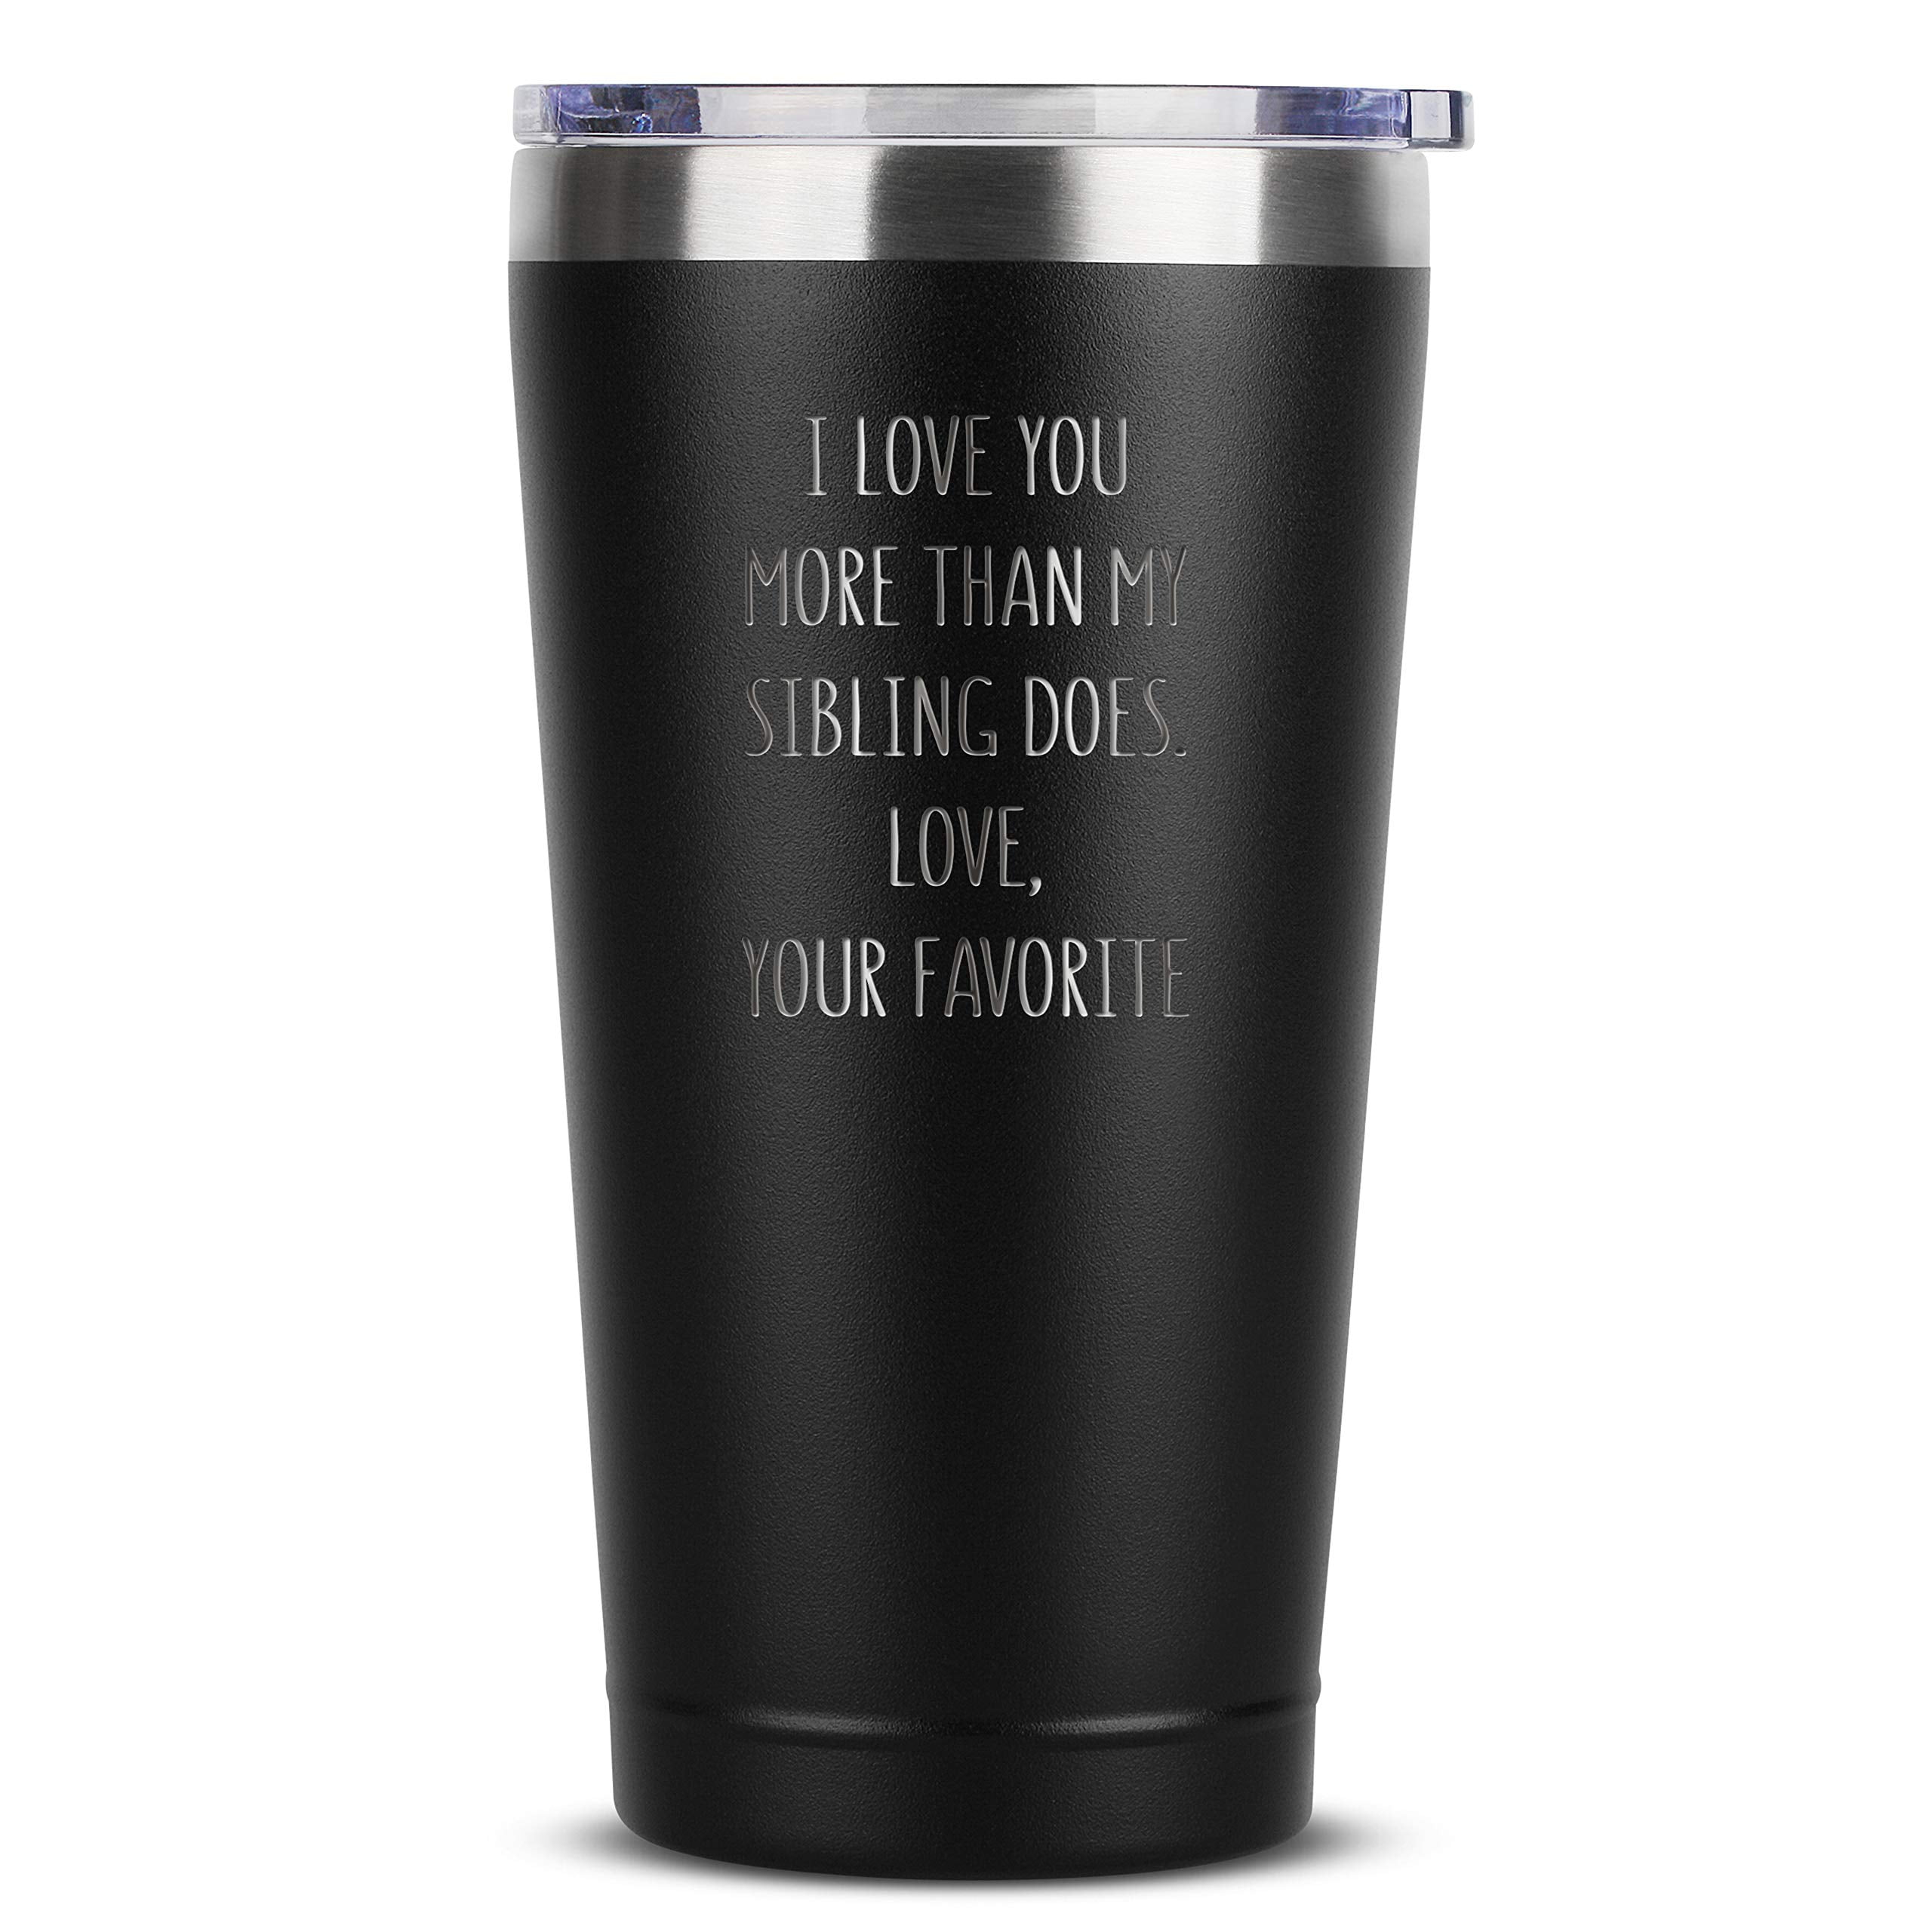 The Sister-Turquoise Birthday Gifts for Soul Best Friend Unbiological Sister Fancyfams Wine Tumbler Friendship Gifts for Women You're the Sister I Got to Choose Personalized Gifts for Women